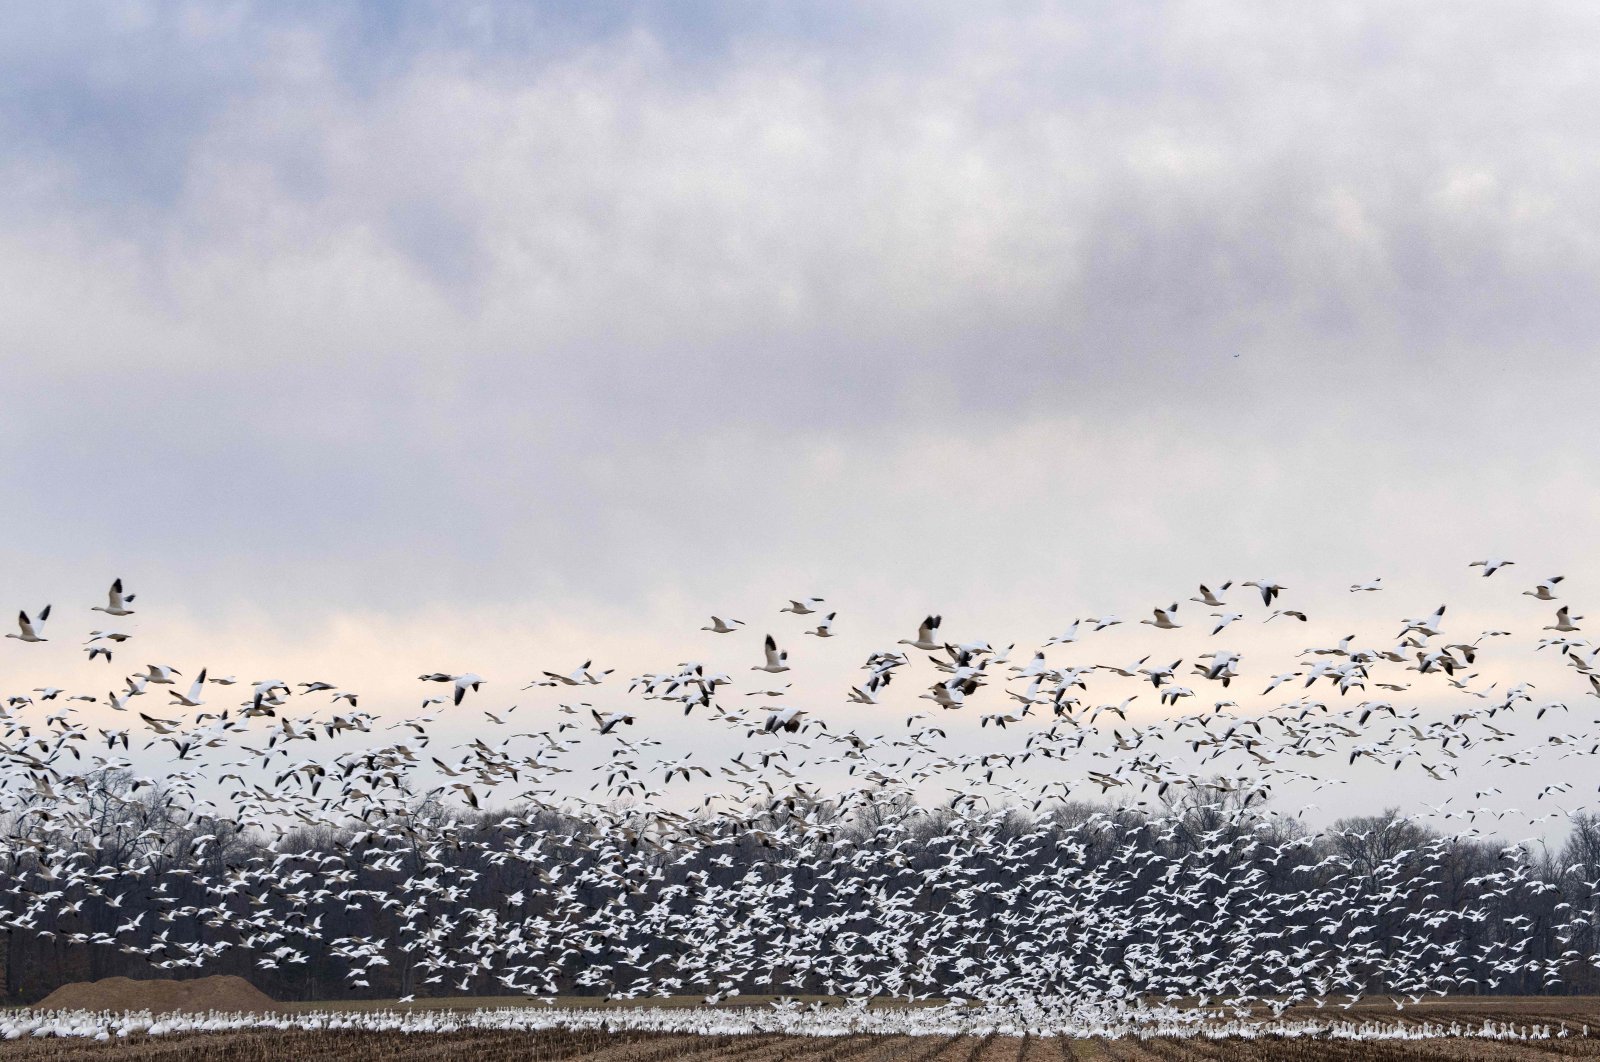 Snow geese take off from a field in Ruthsburg, Maryland, U.S., Jan. 25, 2023. (AFP Photo)